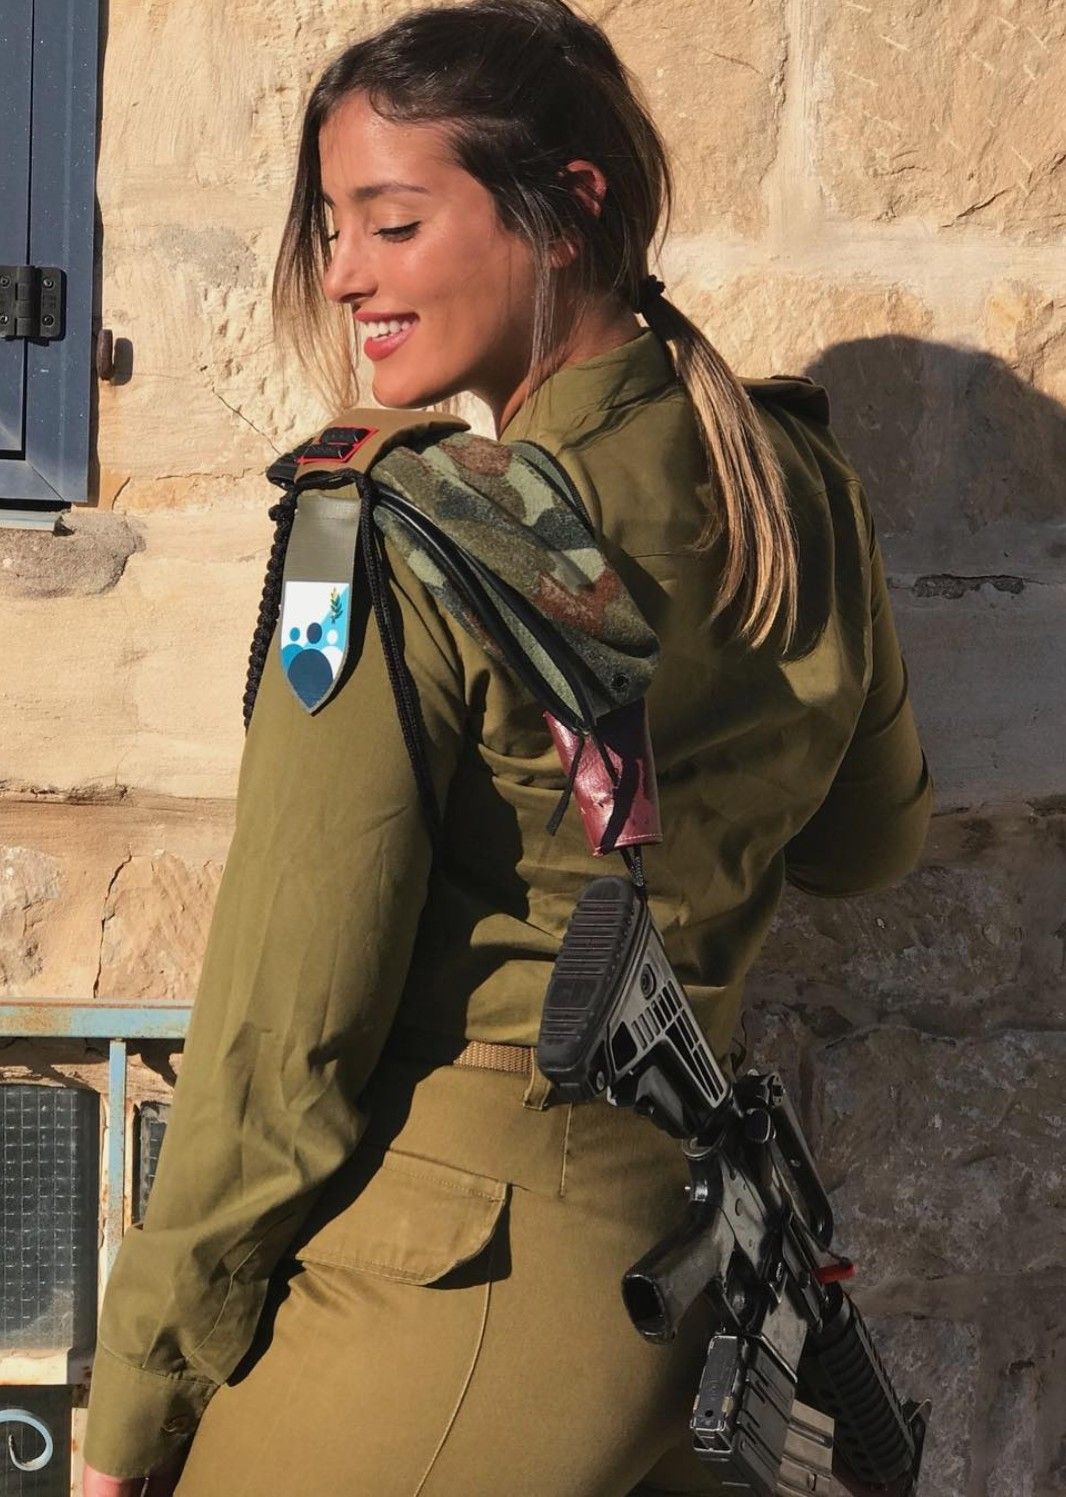 100 Hot Israeli Girls Beautiful And Hot Women In Idf Israel Defense Forces Page 4 Of 109